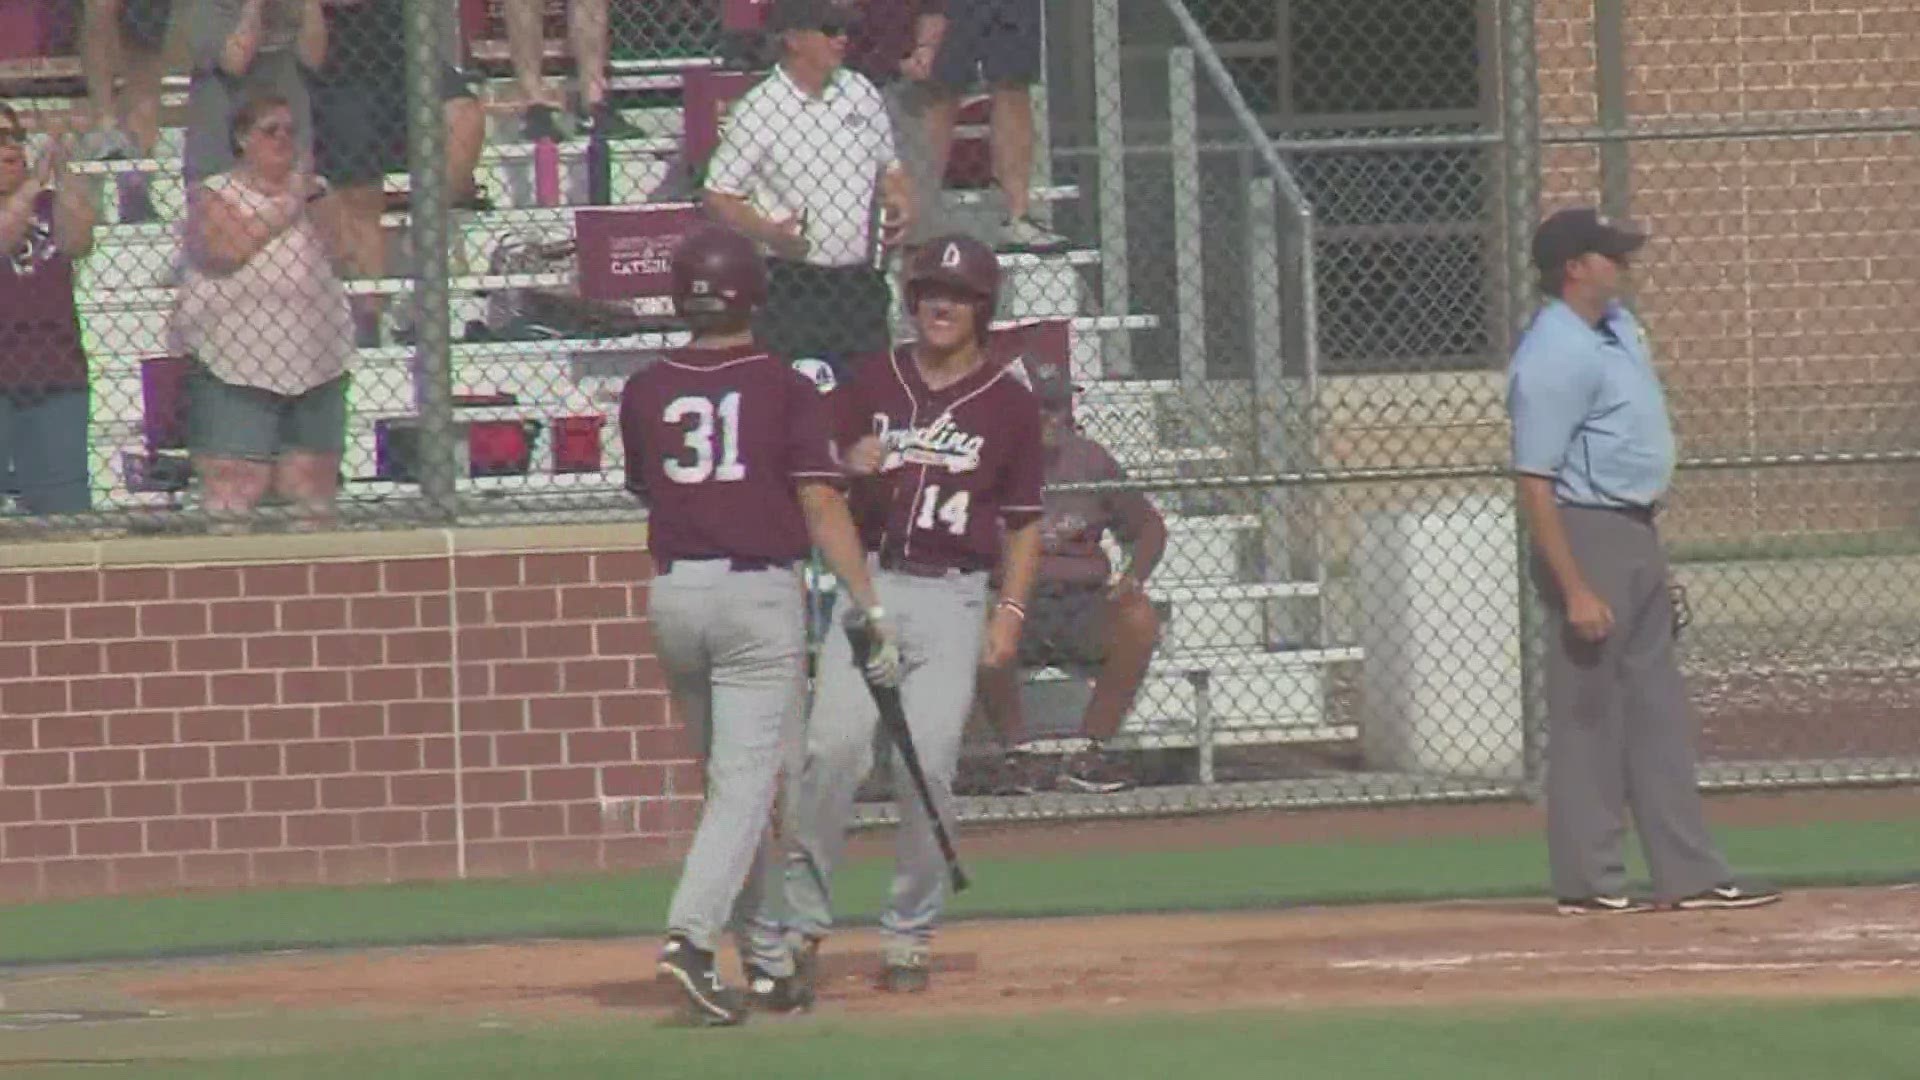 Local 5's Matt McCullock reports on the crossroads for Dowling's baseball program, over concerns a player and coach came into contact with someone with coronavirus.